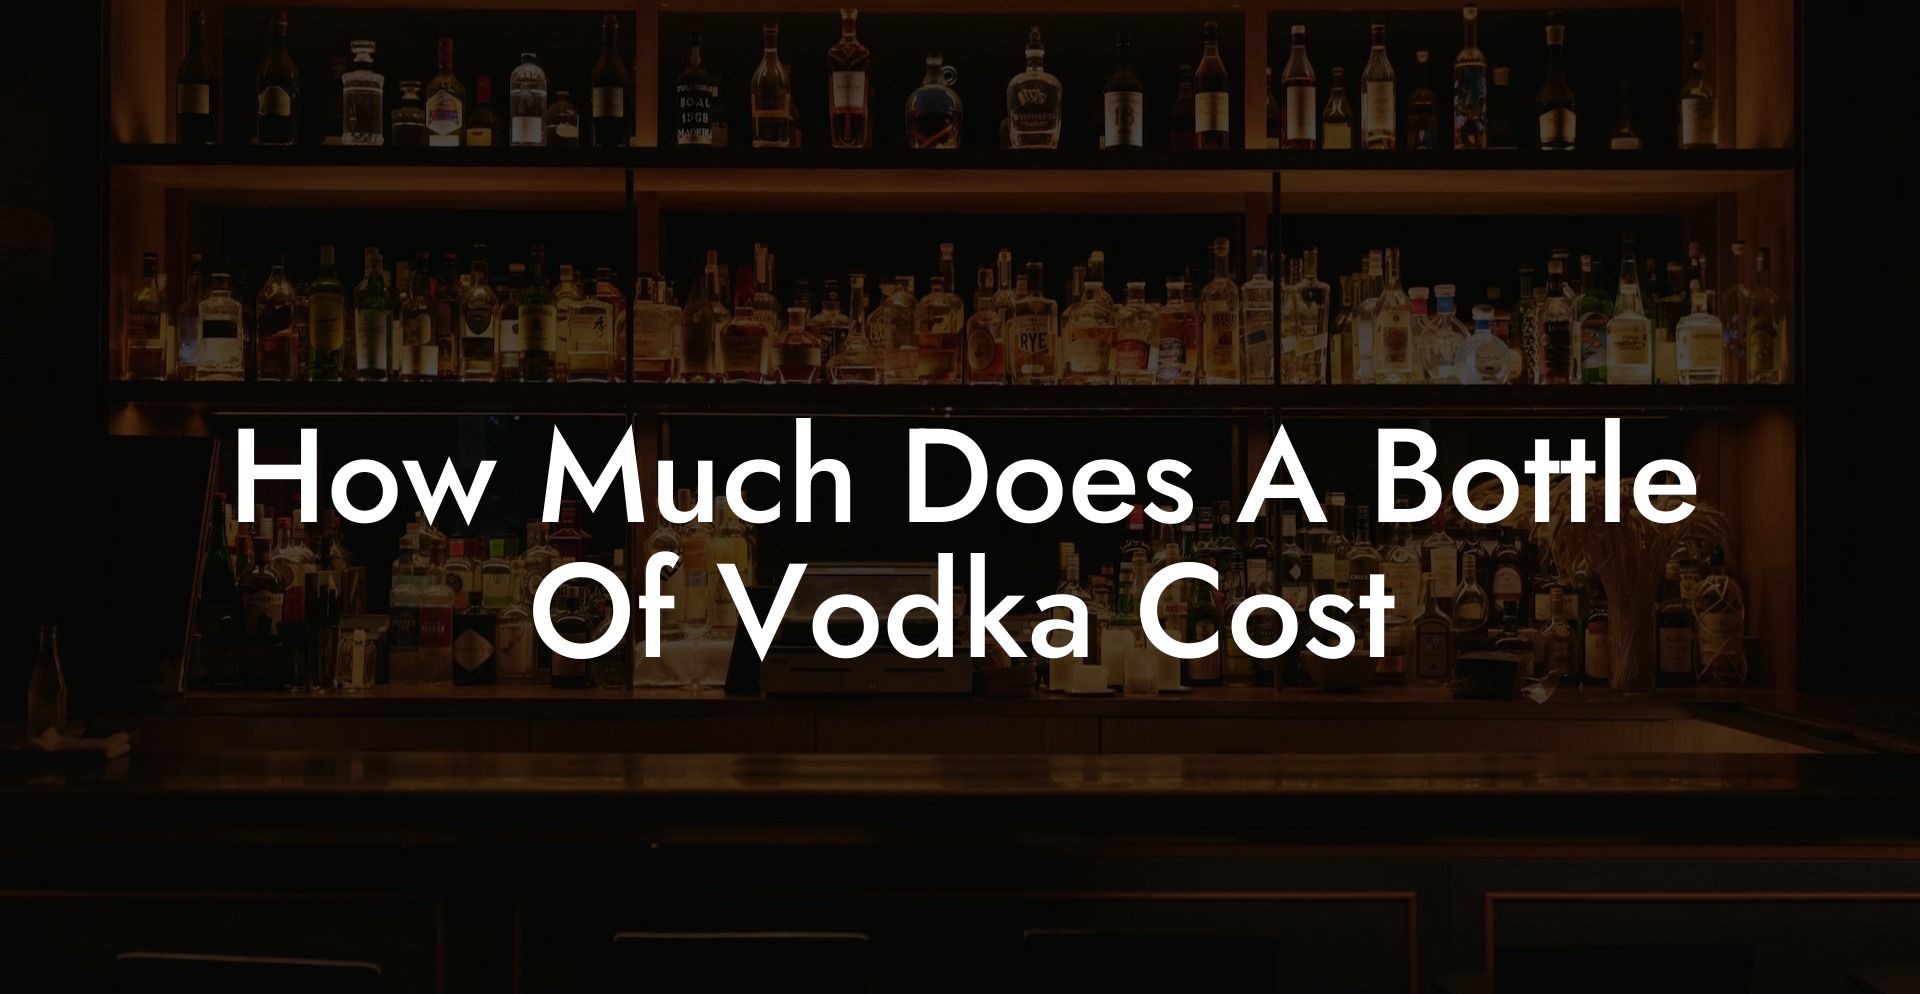 How Much Does A Bottle Of Vodka Cost